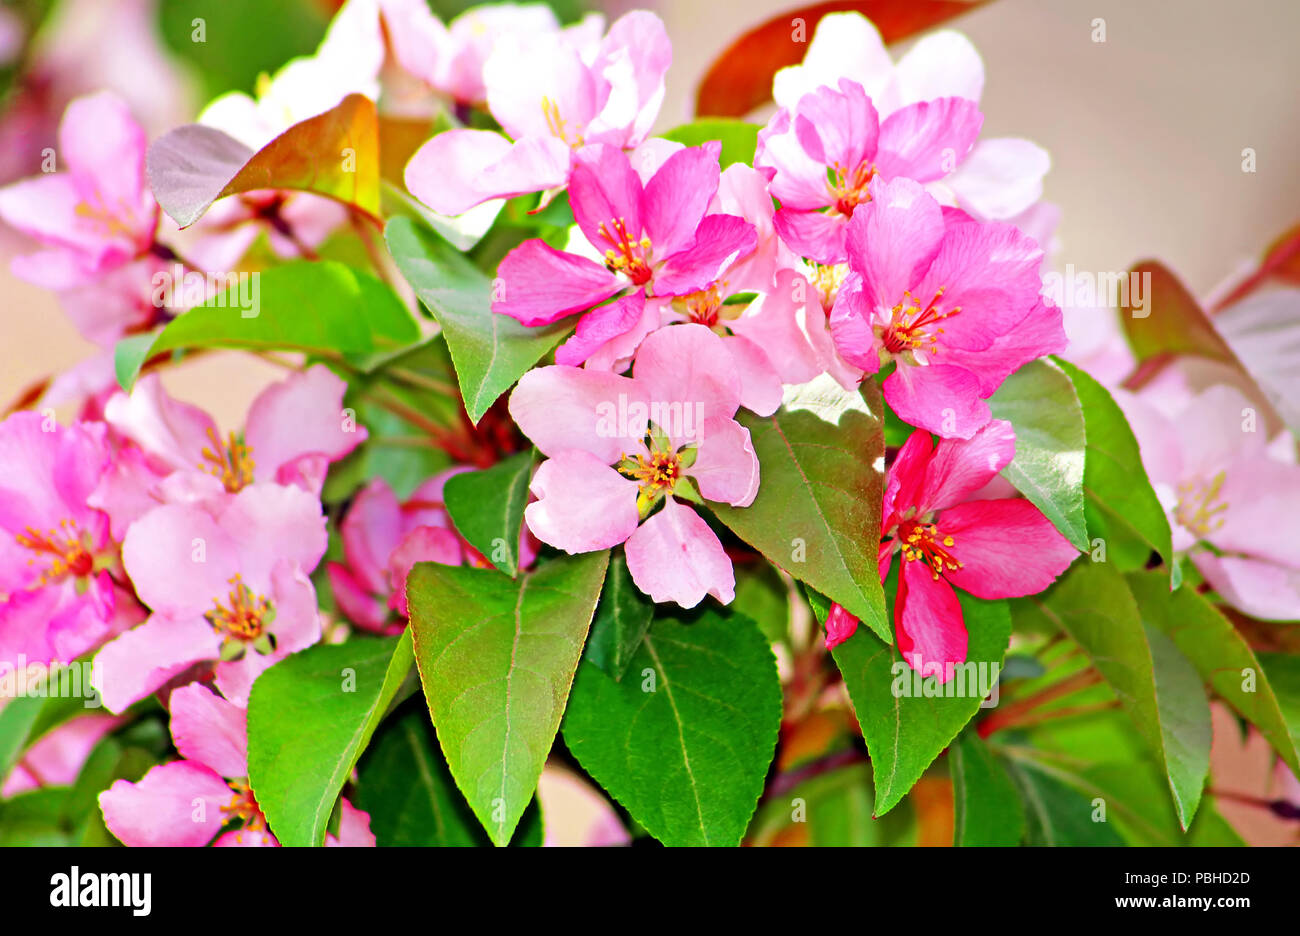 Pink apple blossom in garden Stock Photo